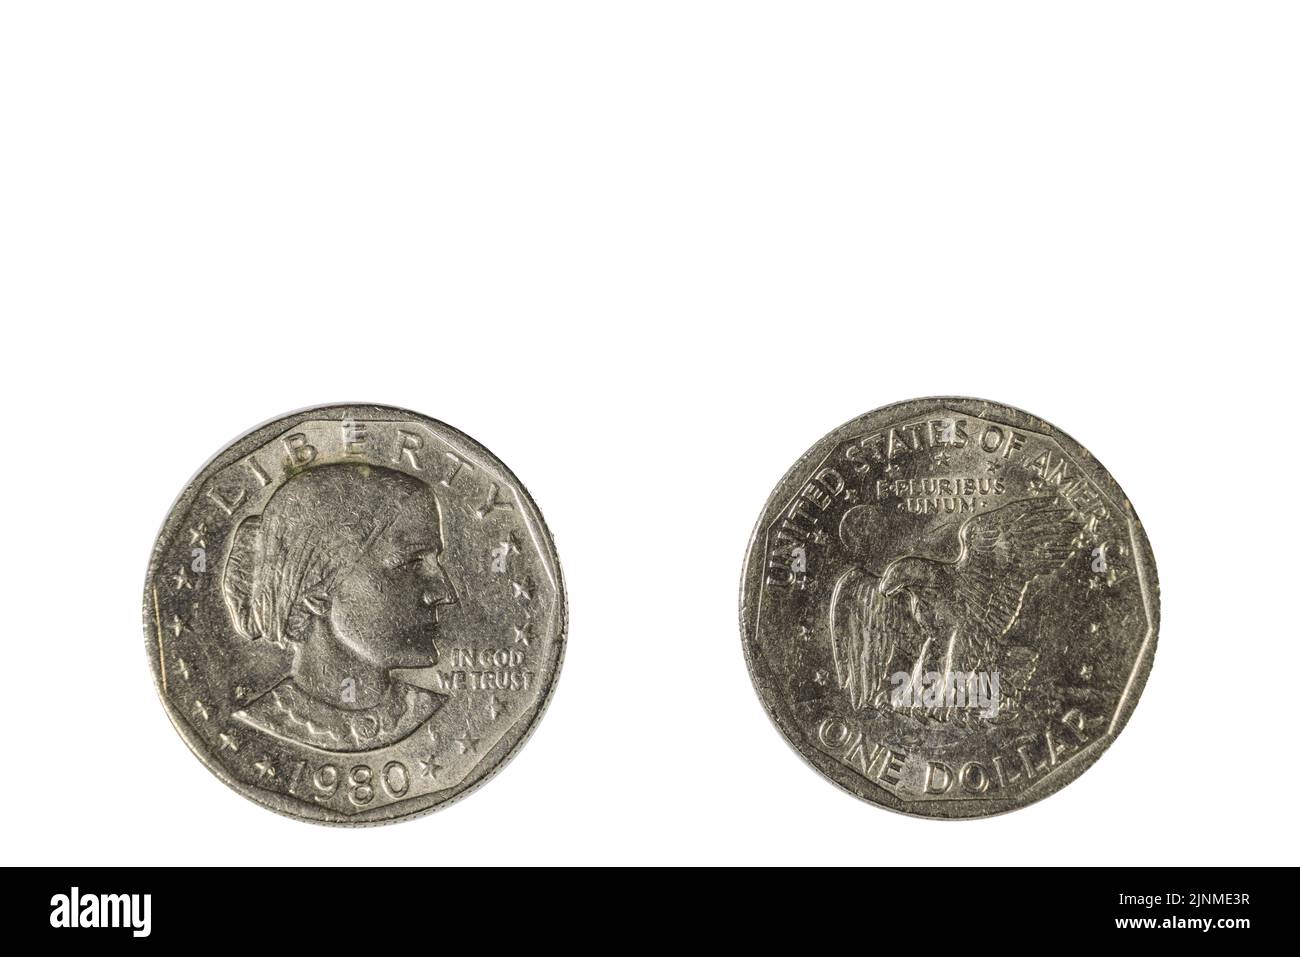 Close up view of front and back side of one USA dollar silver coin dated 1980. Numismatic concept. Stock Photo